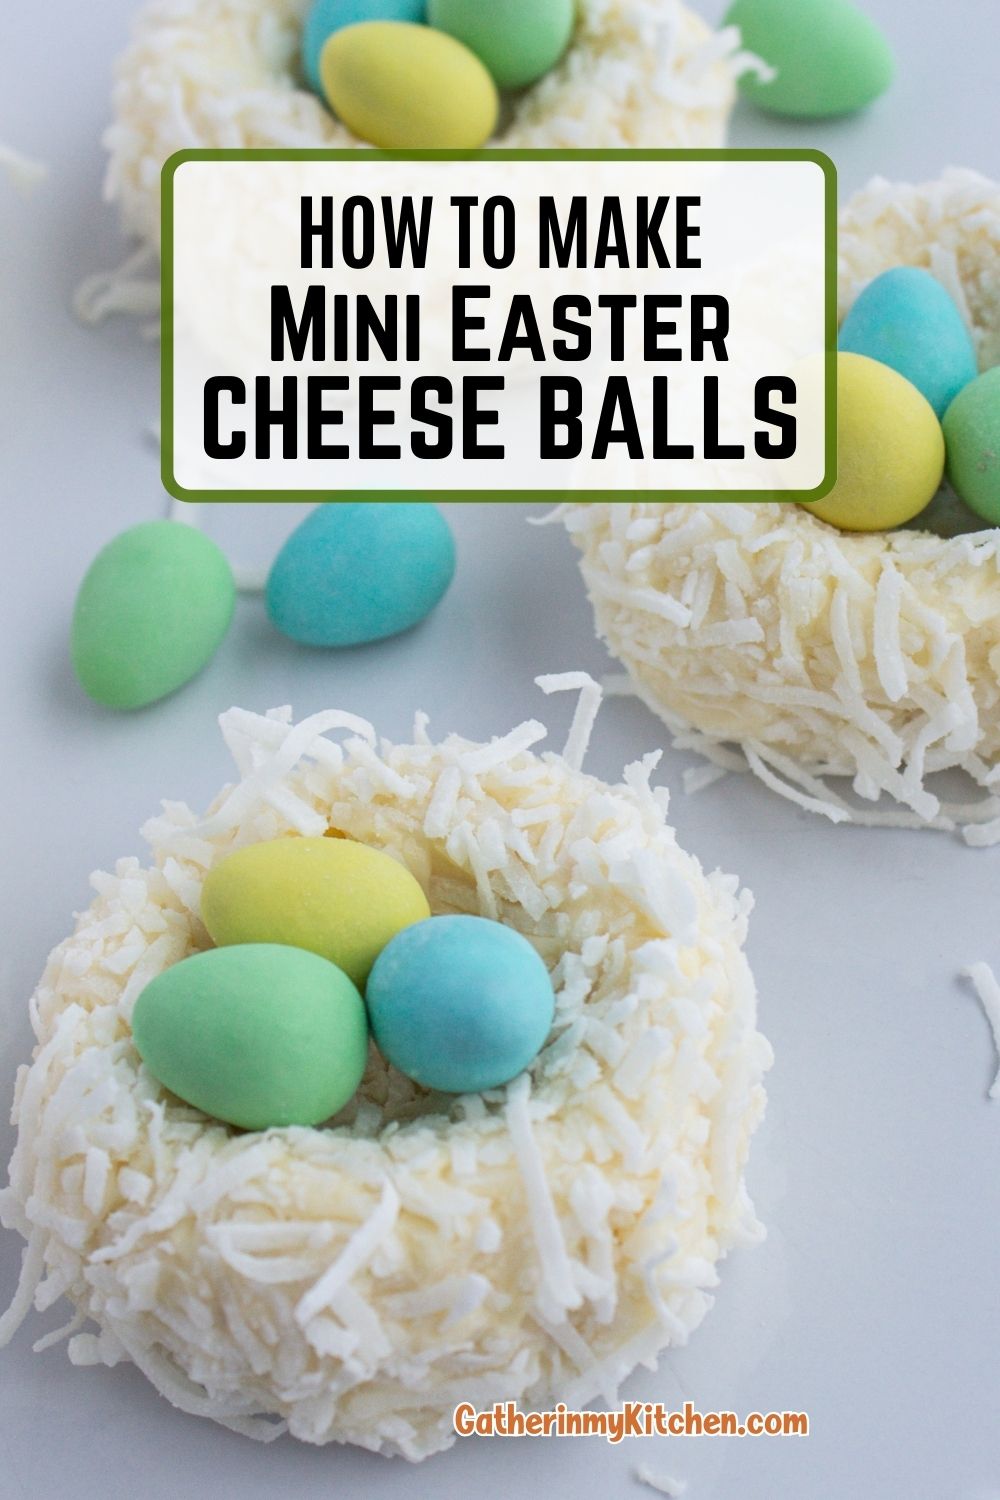 Pin image: Picture of mini Easter cheeseball nests with the words "How to Make Mini Easter Cheese Balls".